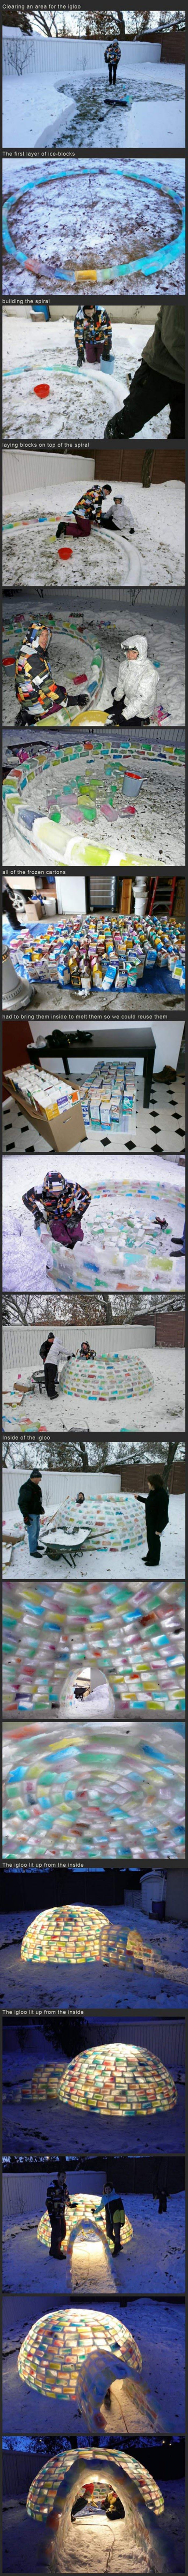 awesome igloo funny picture